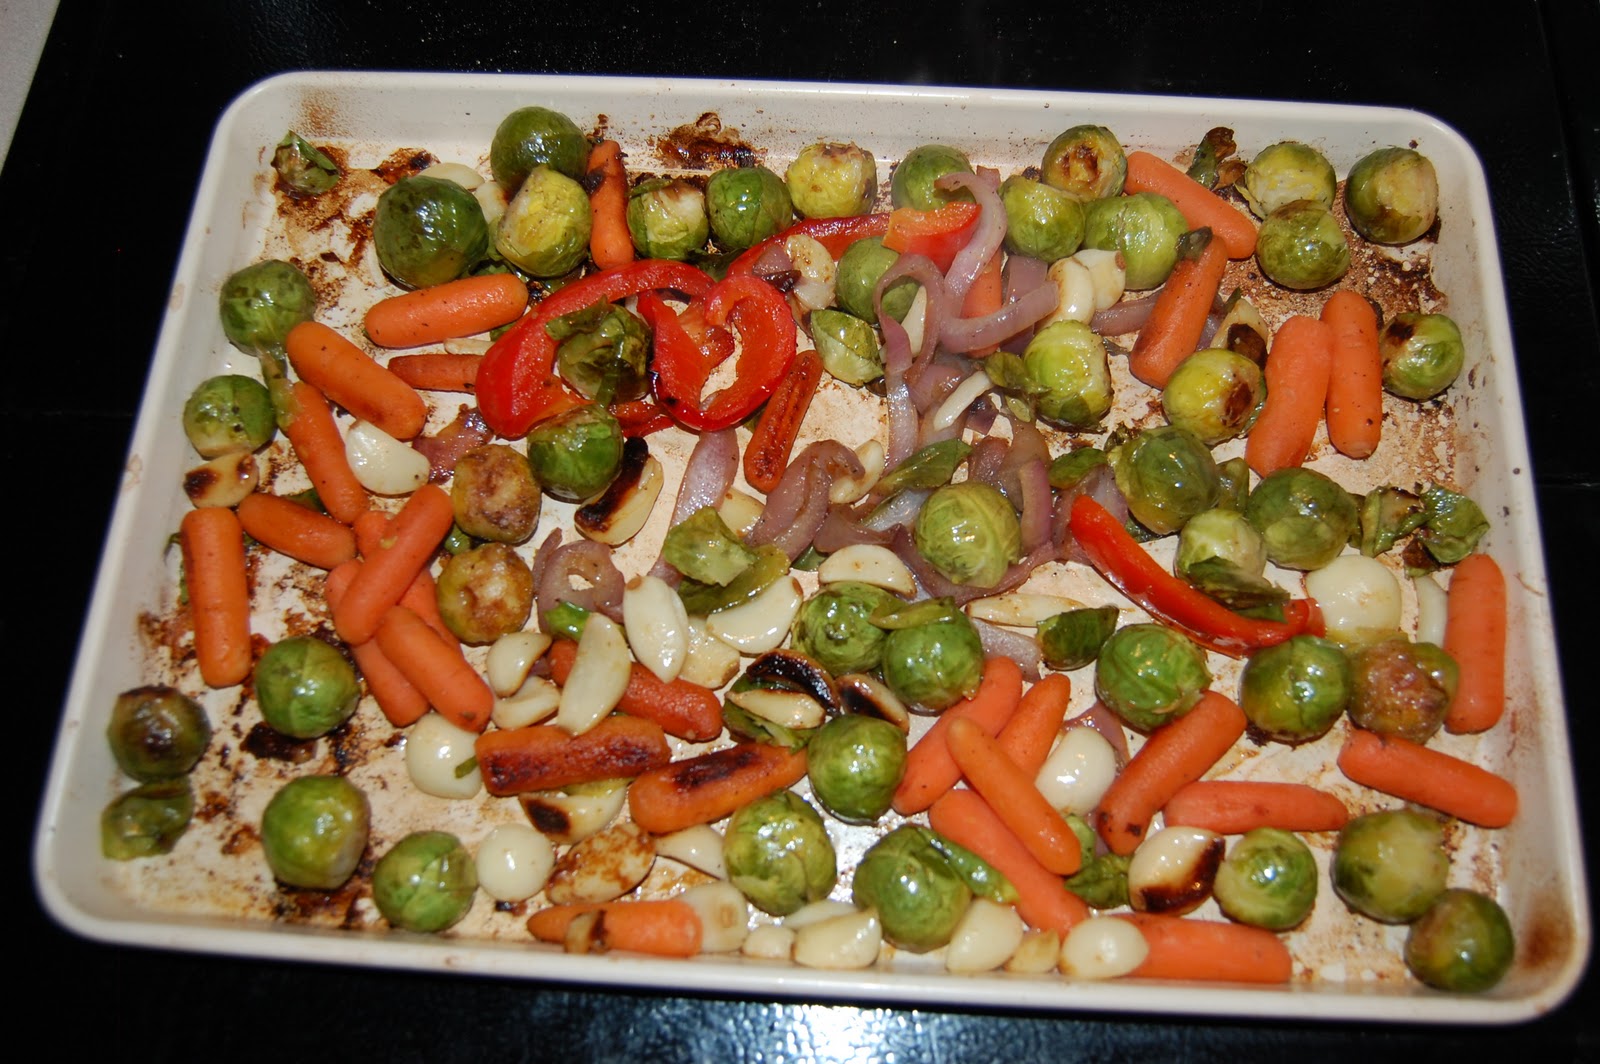 Healthy living one tip at a time.: Yummy brussels sprouts with garlic.